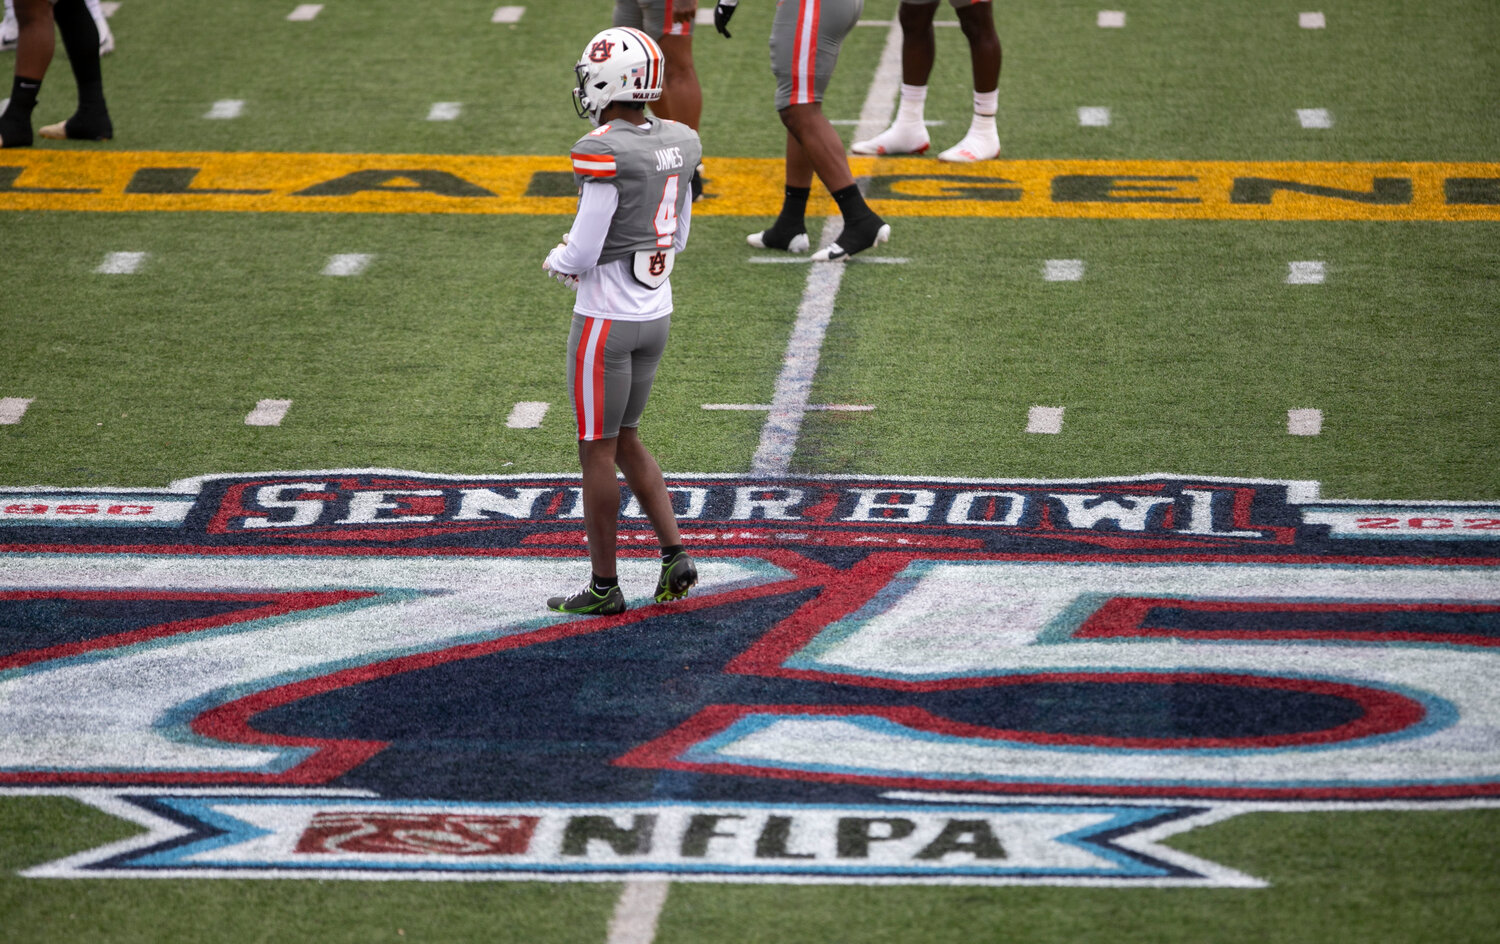 DJ James goes through warmups ahead of Saturday’s Senior Bowl game at Mobile’s Hancock Whitney Stadium on the campus of South Alabama. The former Oregon Duck and Auburn Tiger played in his hometown one last time as preparations for April’s NFL Draft wind down.